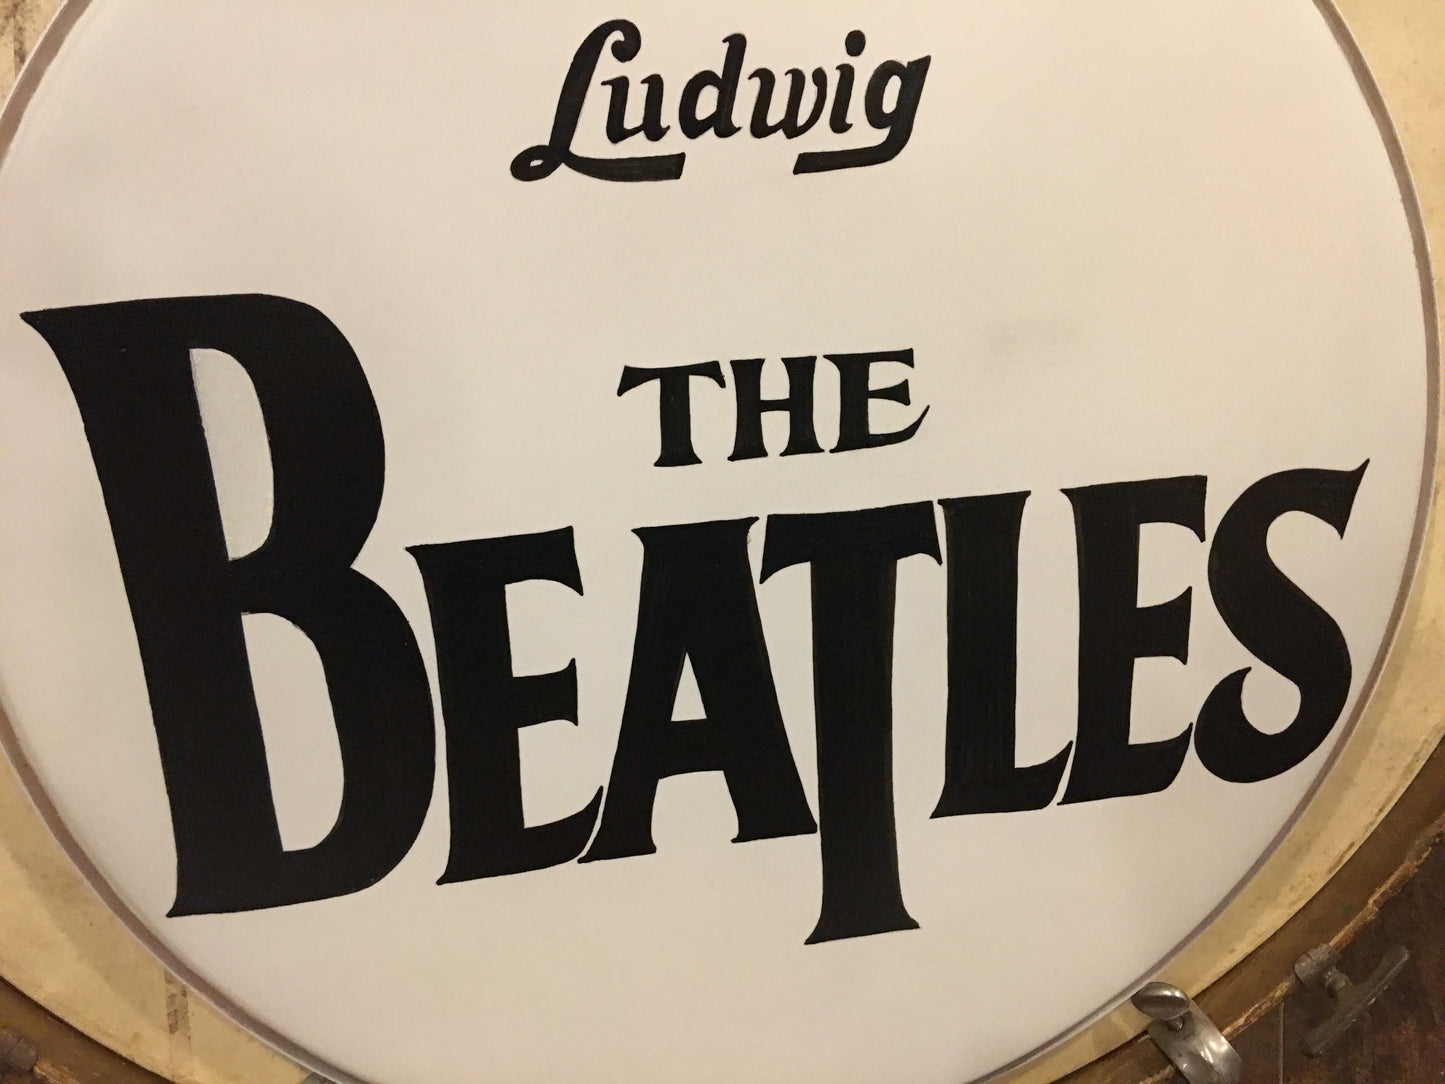 20" Ludwig The Beatles Drum Head Professionally Hand Painted by Artist - Down Beat